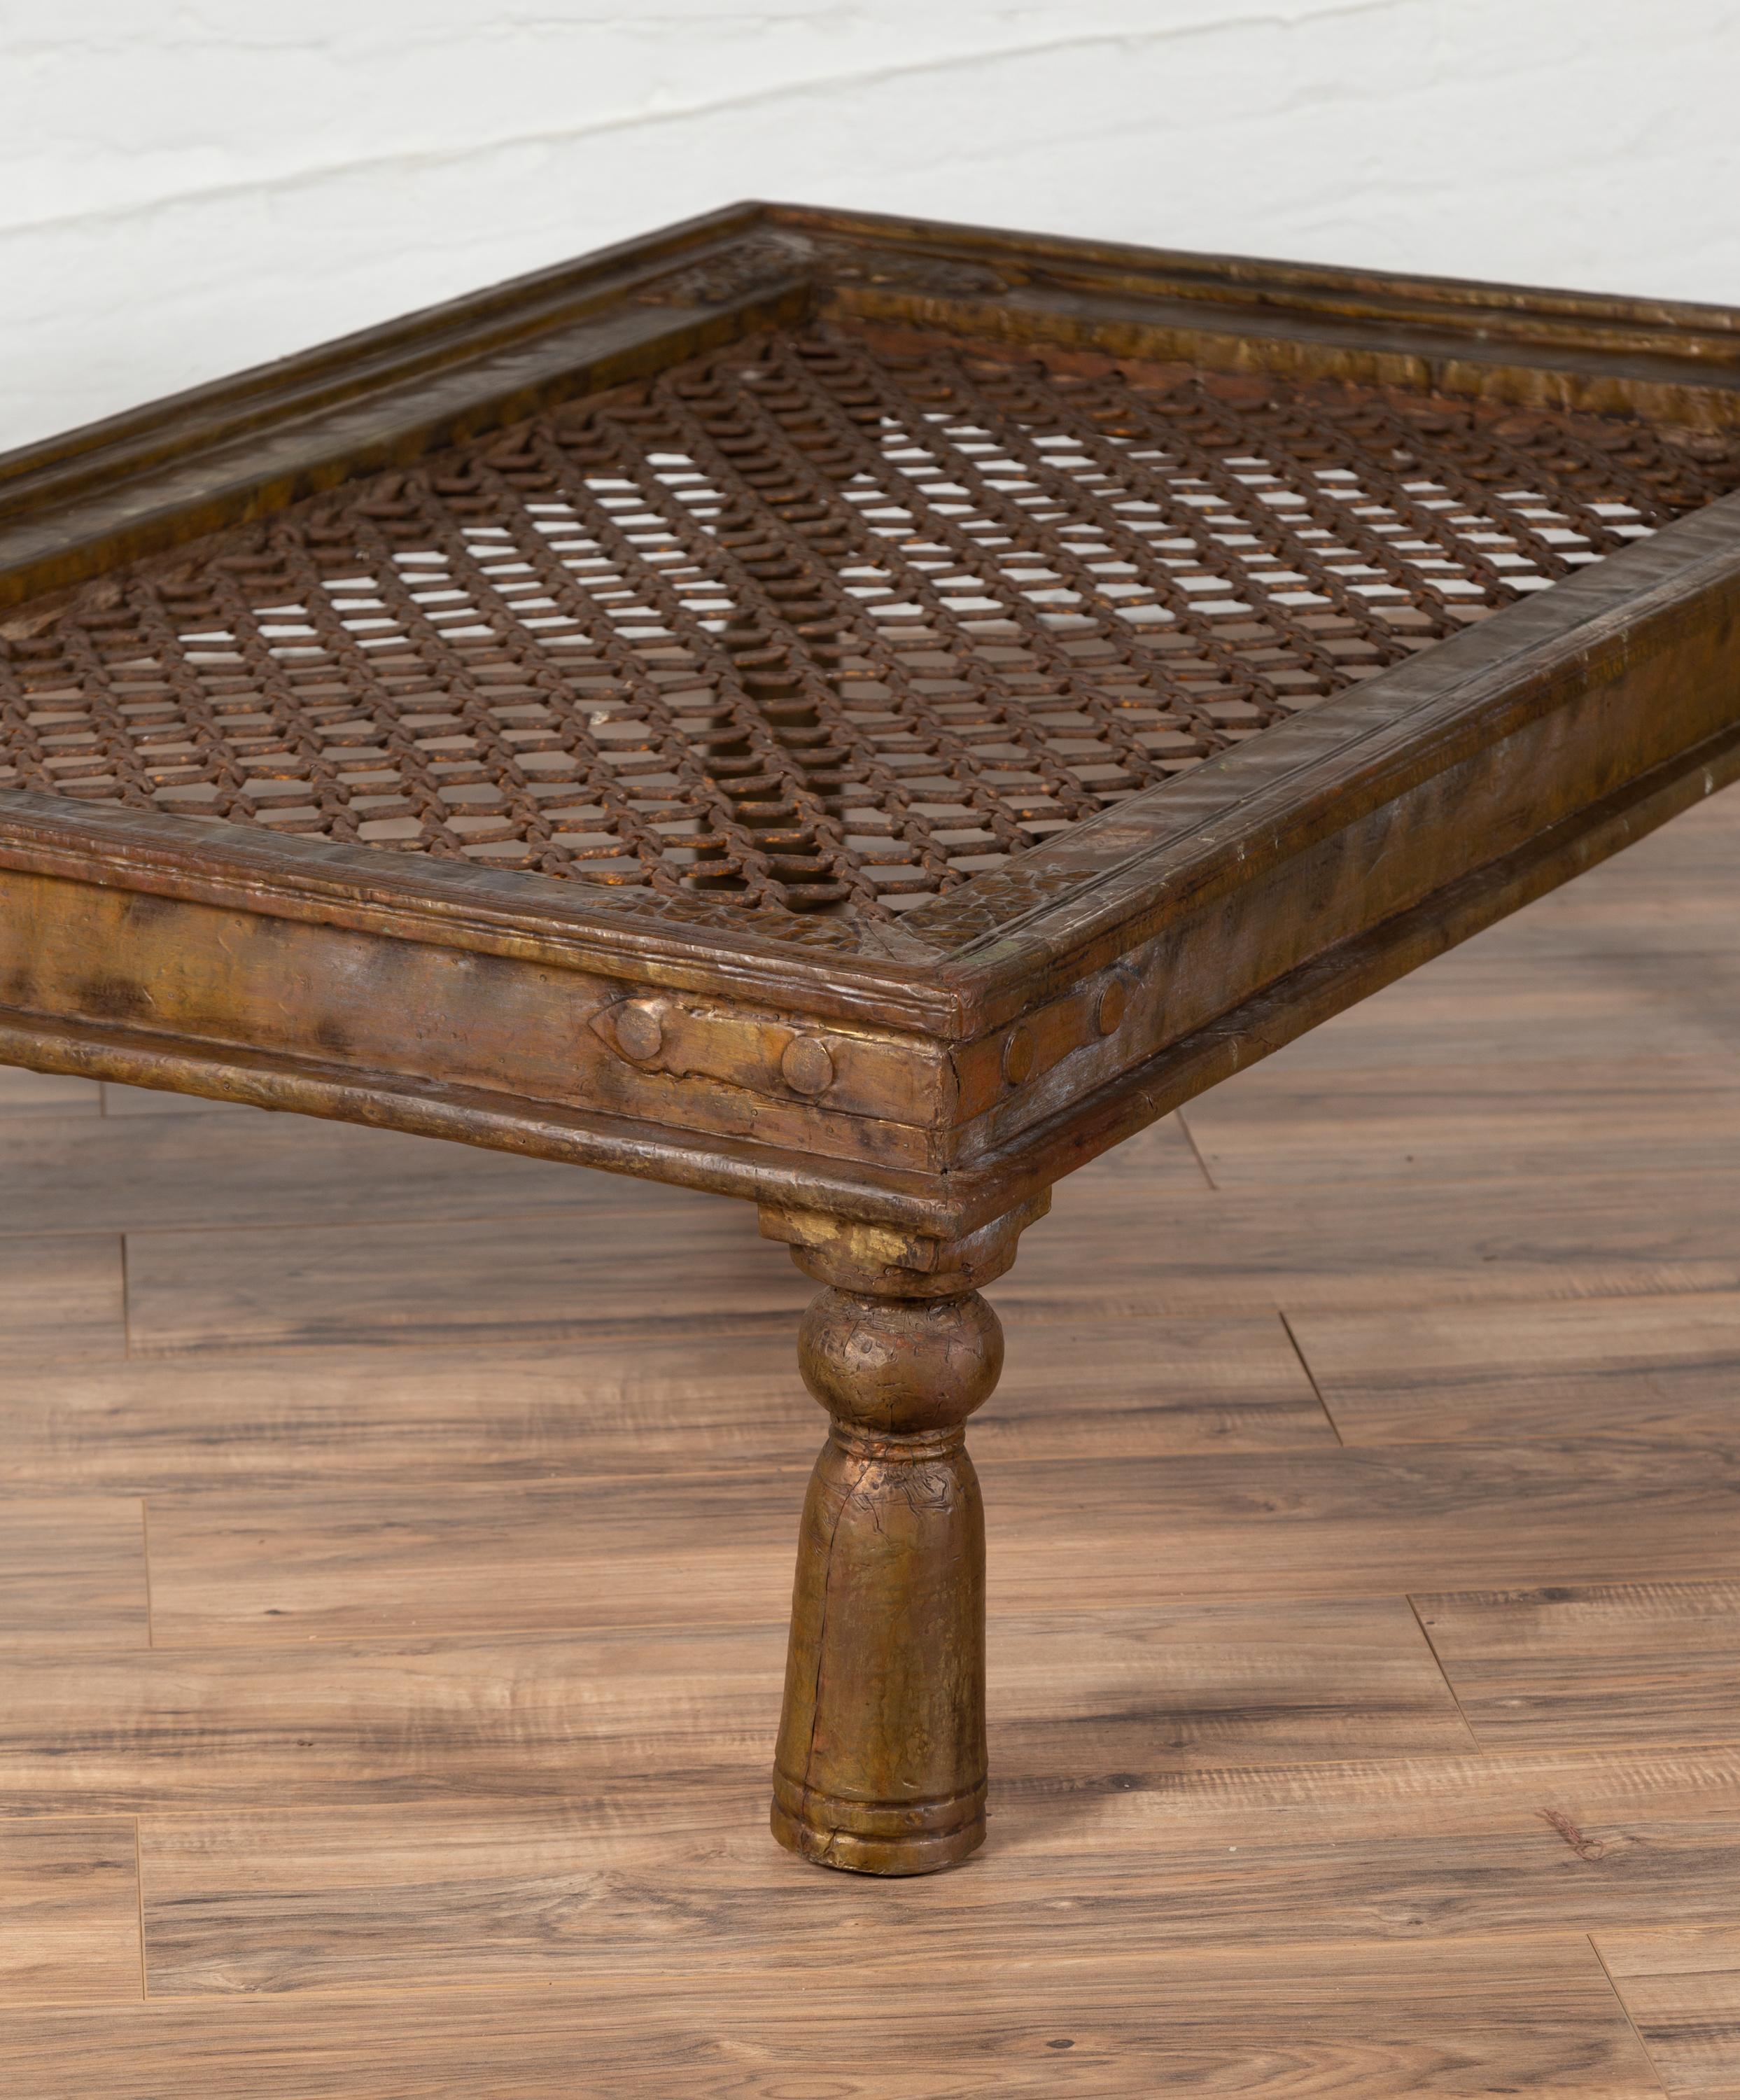 Antique Indian Window Grate Made into a Coffee Table with Copper Sheathing 5